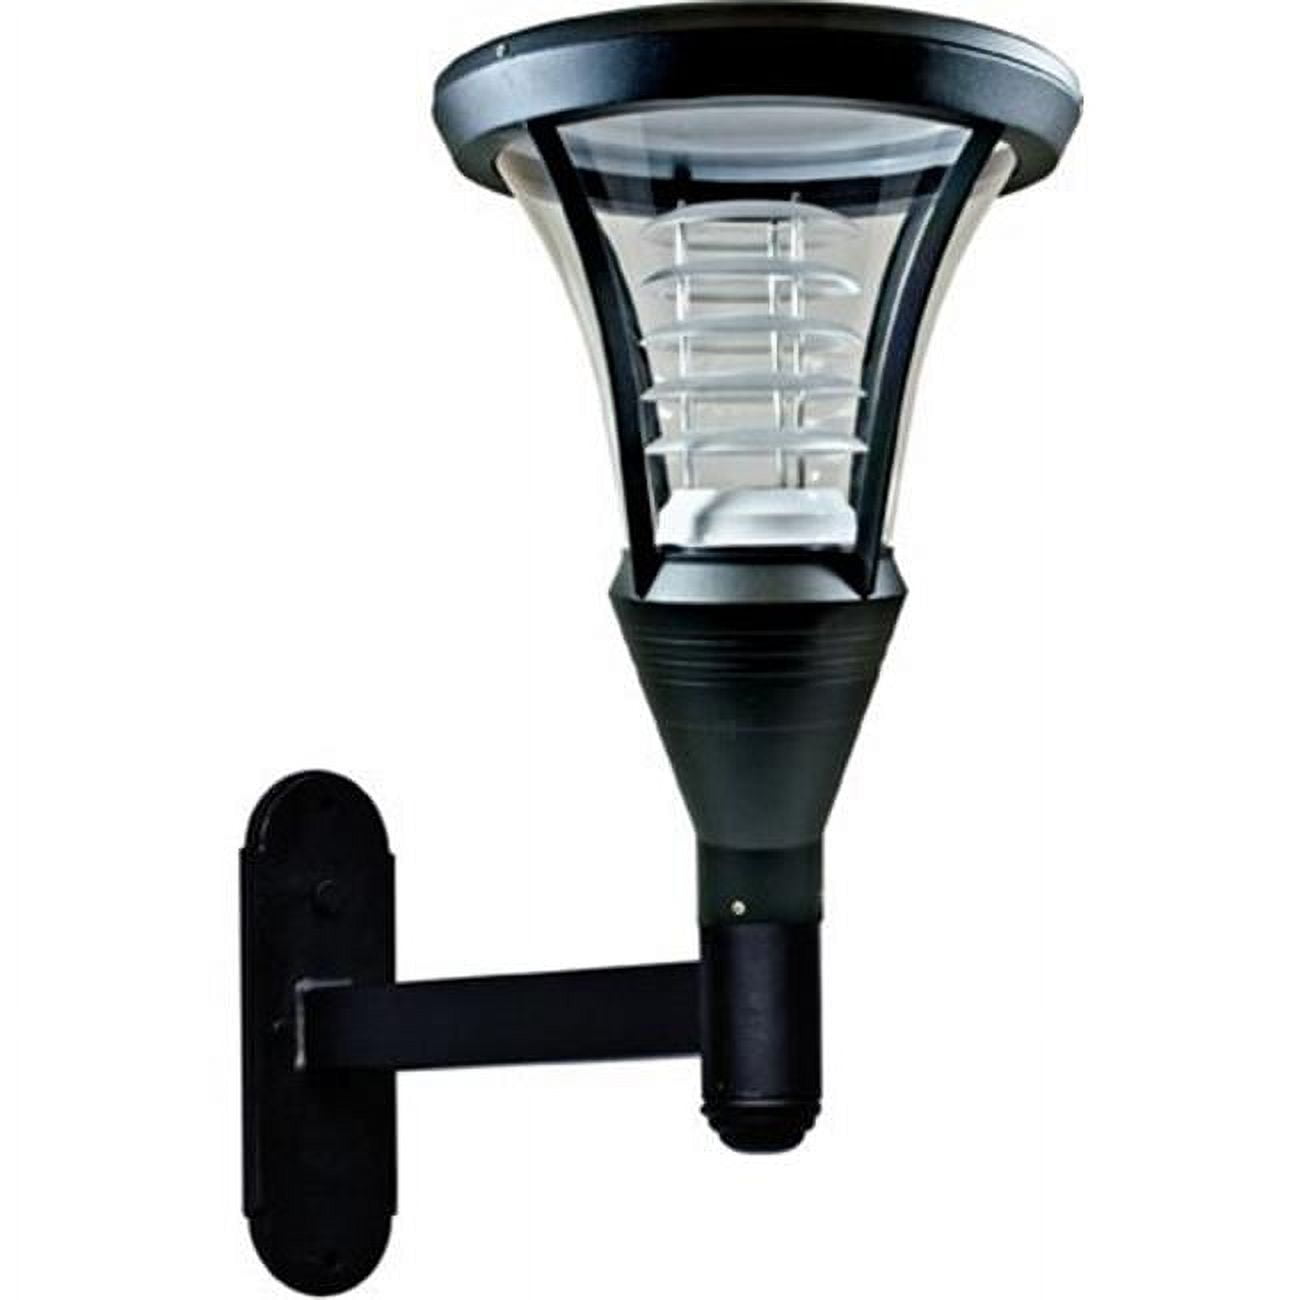 Picture of Dabmar Lighting GM634-B 35W 120V Powder Coated Cast Aluminum Wall Light Fixture with Metal Halide Lamp, Black